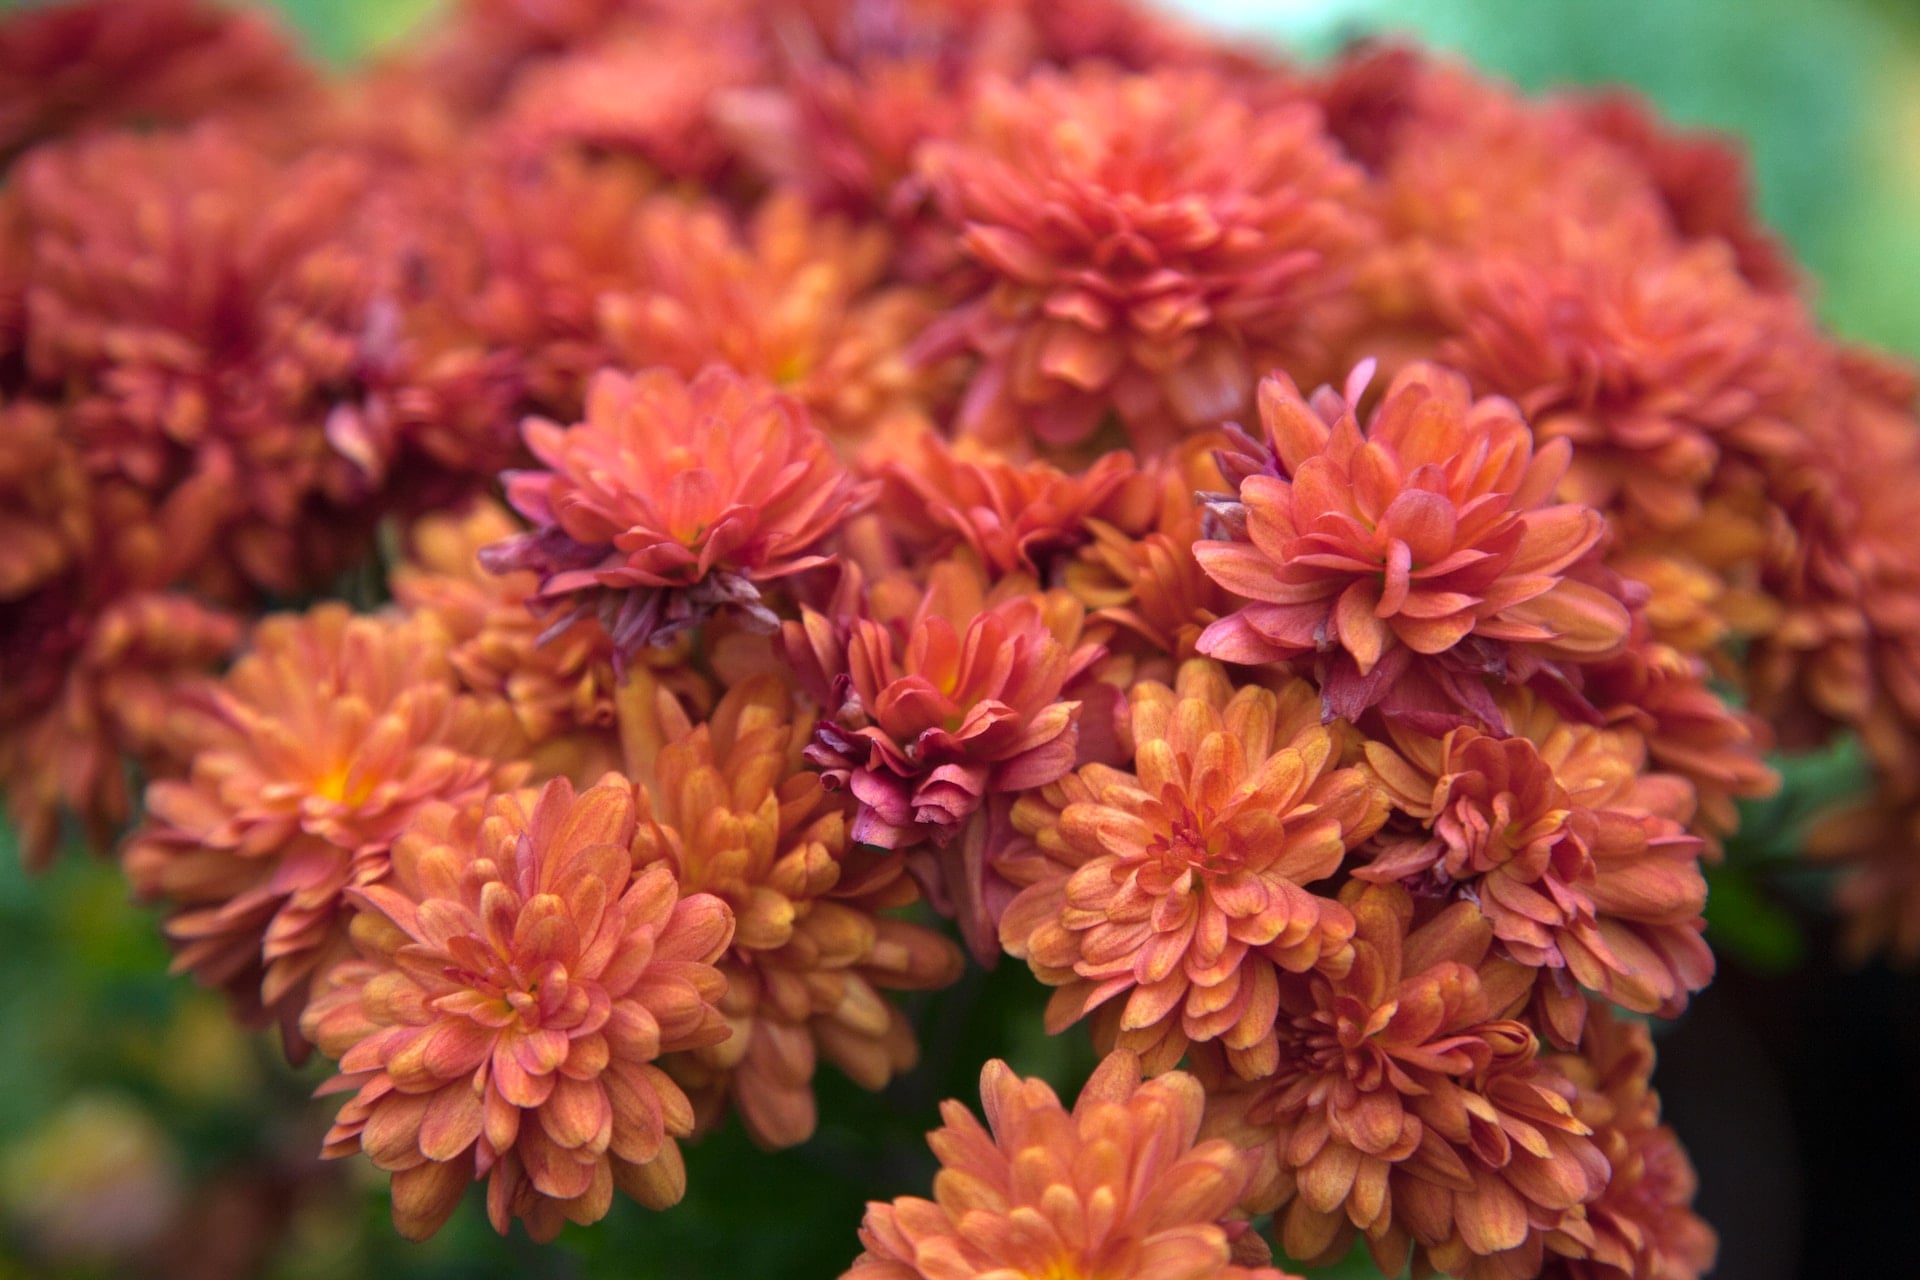 A close up of bright orange flowers in Cohoes, New York.